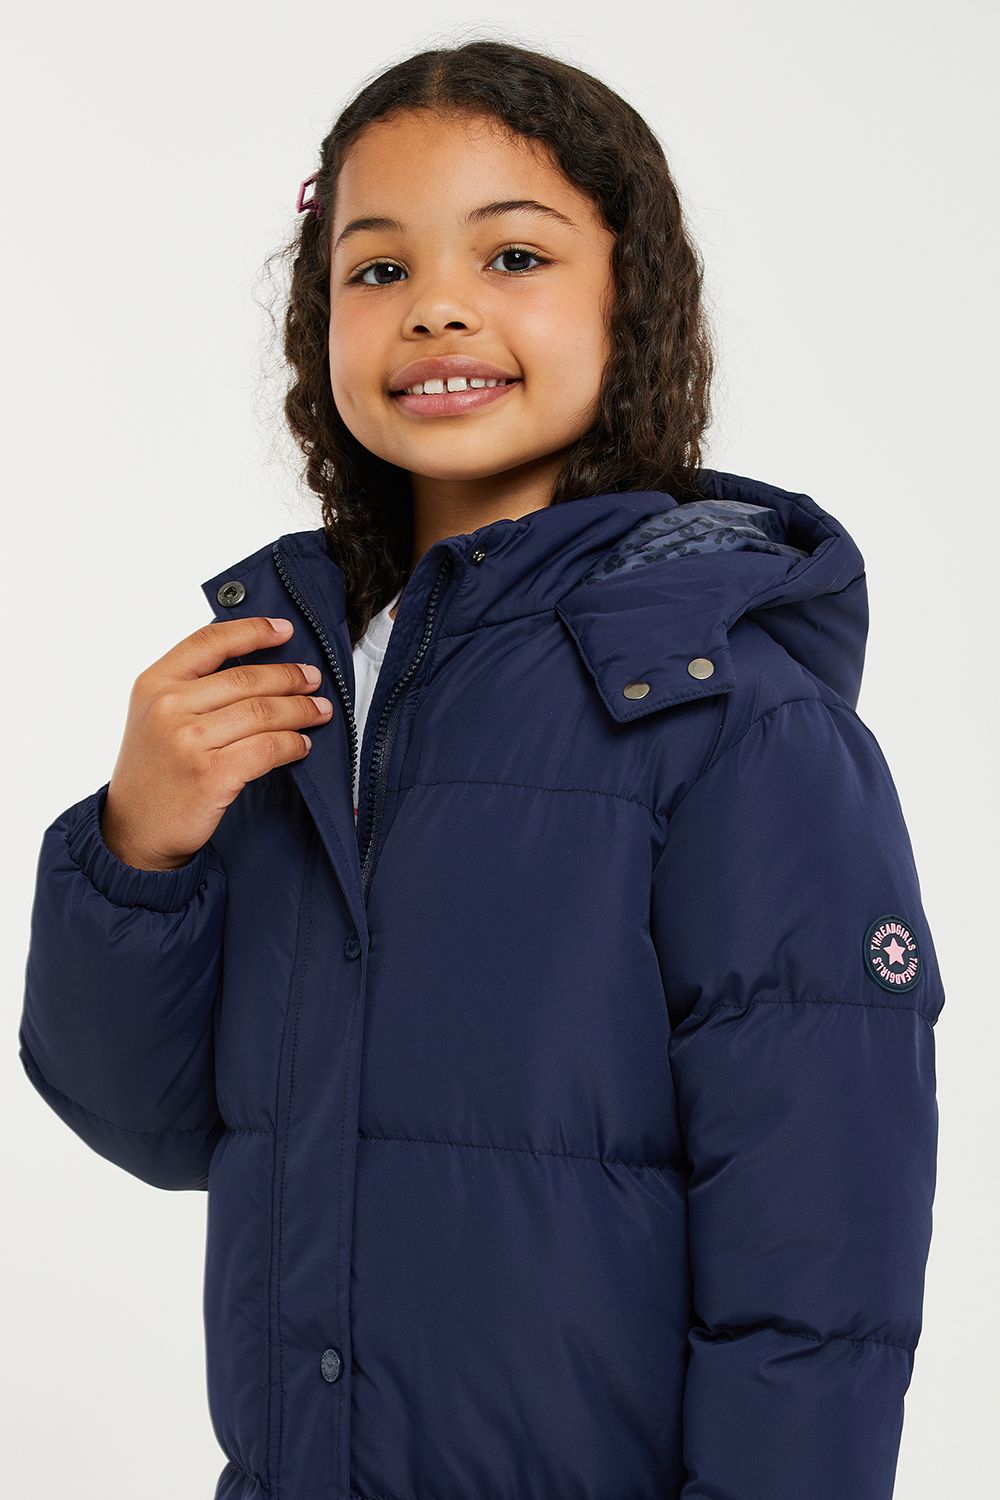 This longline hooded, padded jacket from Threadgirls features a two-way zip and popper fastenings. The jacket also has two side pockets, elasticated cuffs, and branded badge on the sleeve. Perfect for keeping warm this back-to-school season, other colours and styles are also available.